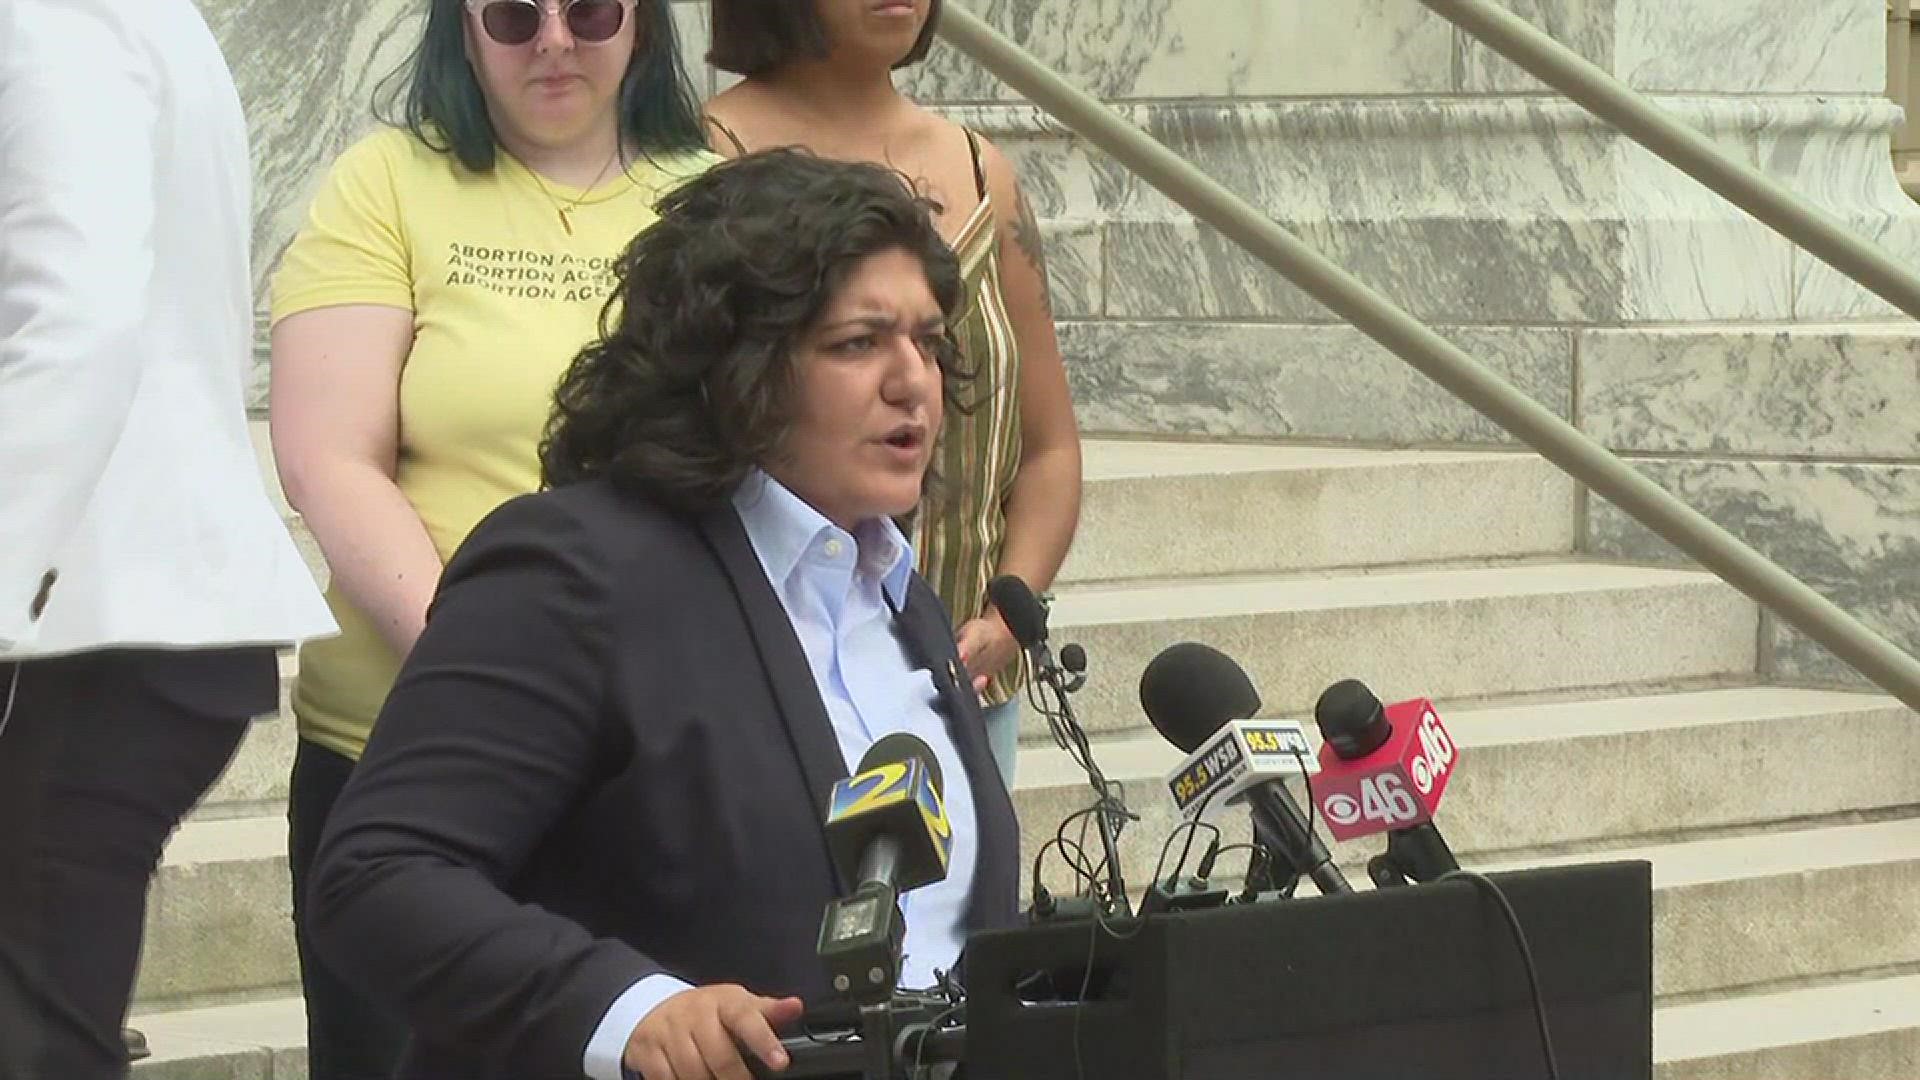 Councilmember Liliana Bakhtiari urged other cities to do the same in the wake of the U.S. Supreme Court overturning Roe v. Wade.